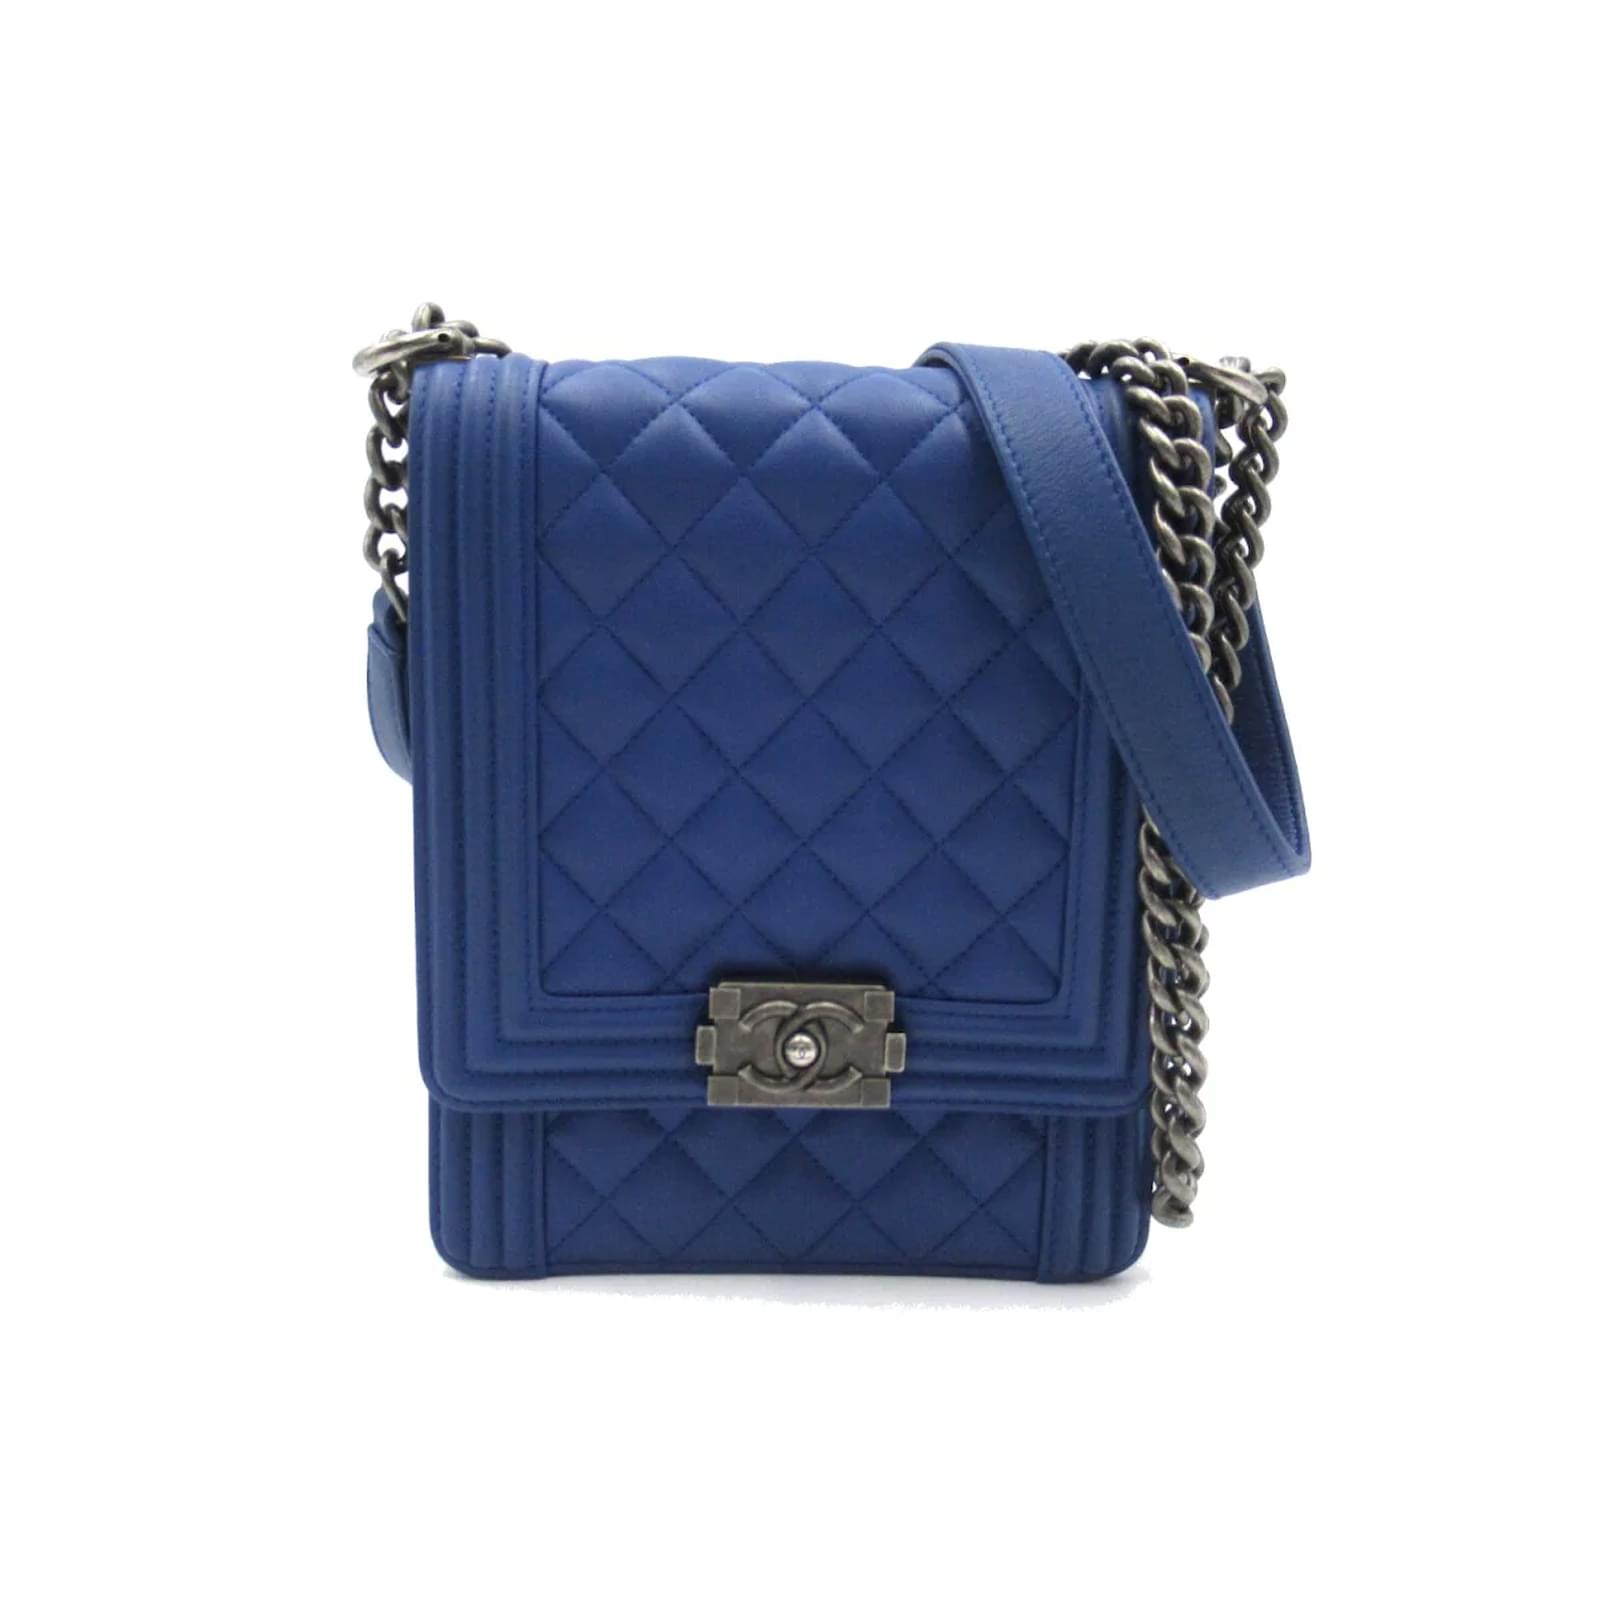 CHANEL Blue Bags & Handbags for Women, Authenticity Guaranteed